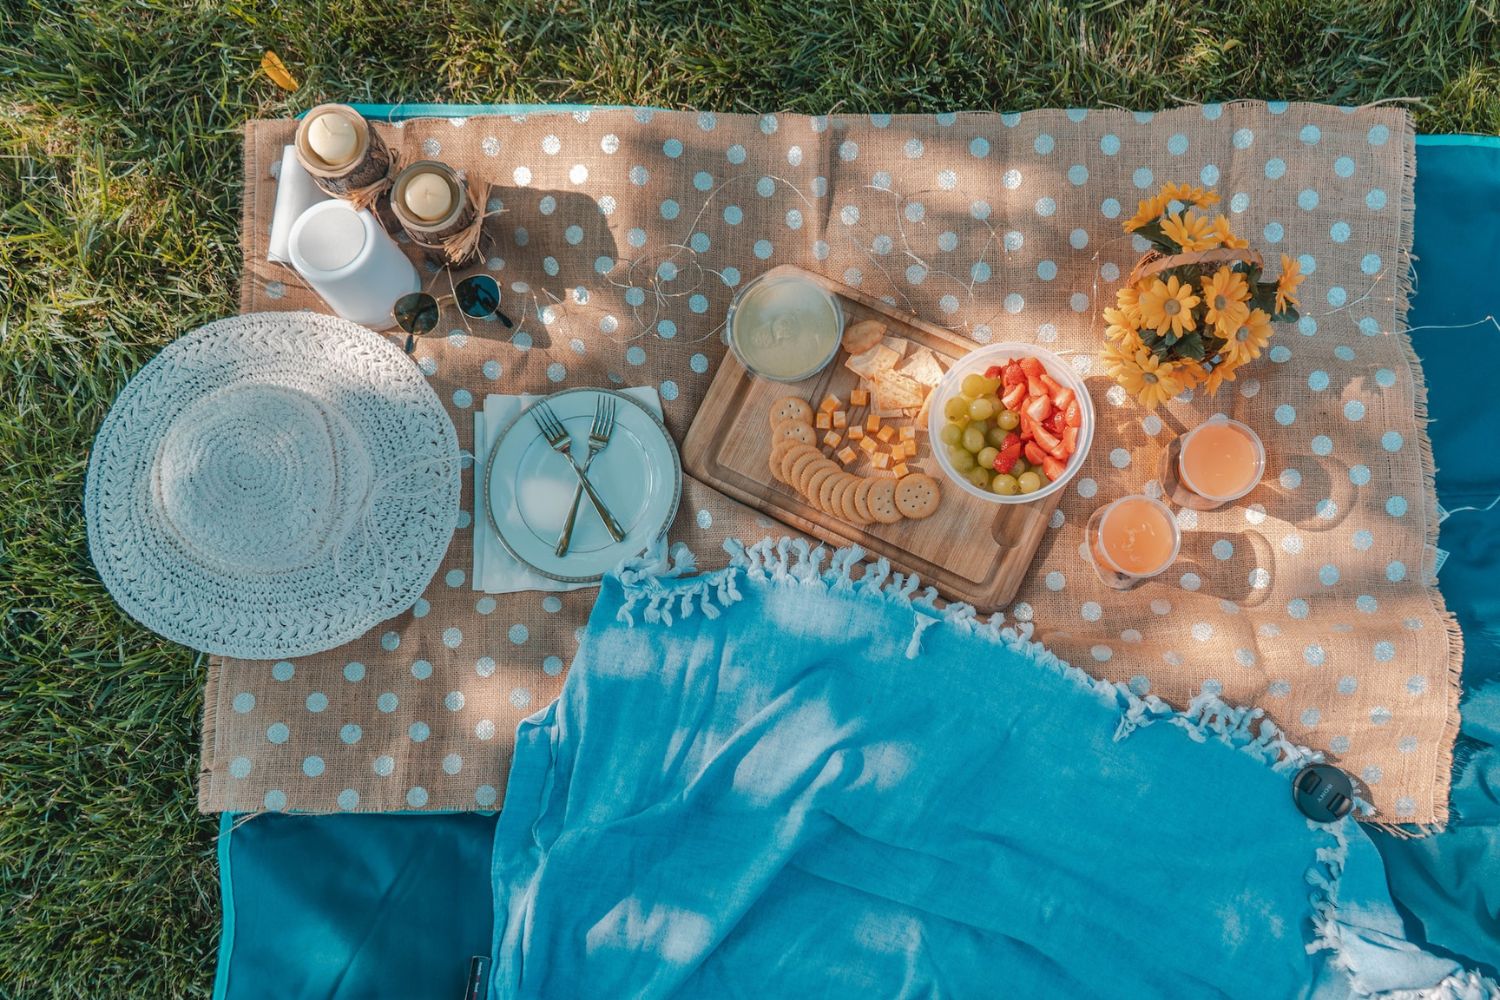 picnic photo with food and wooden serving tray